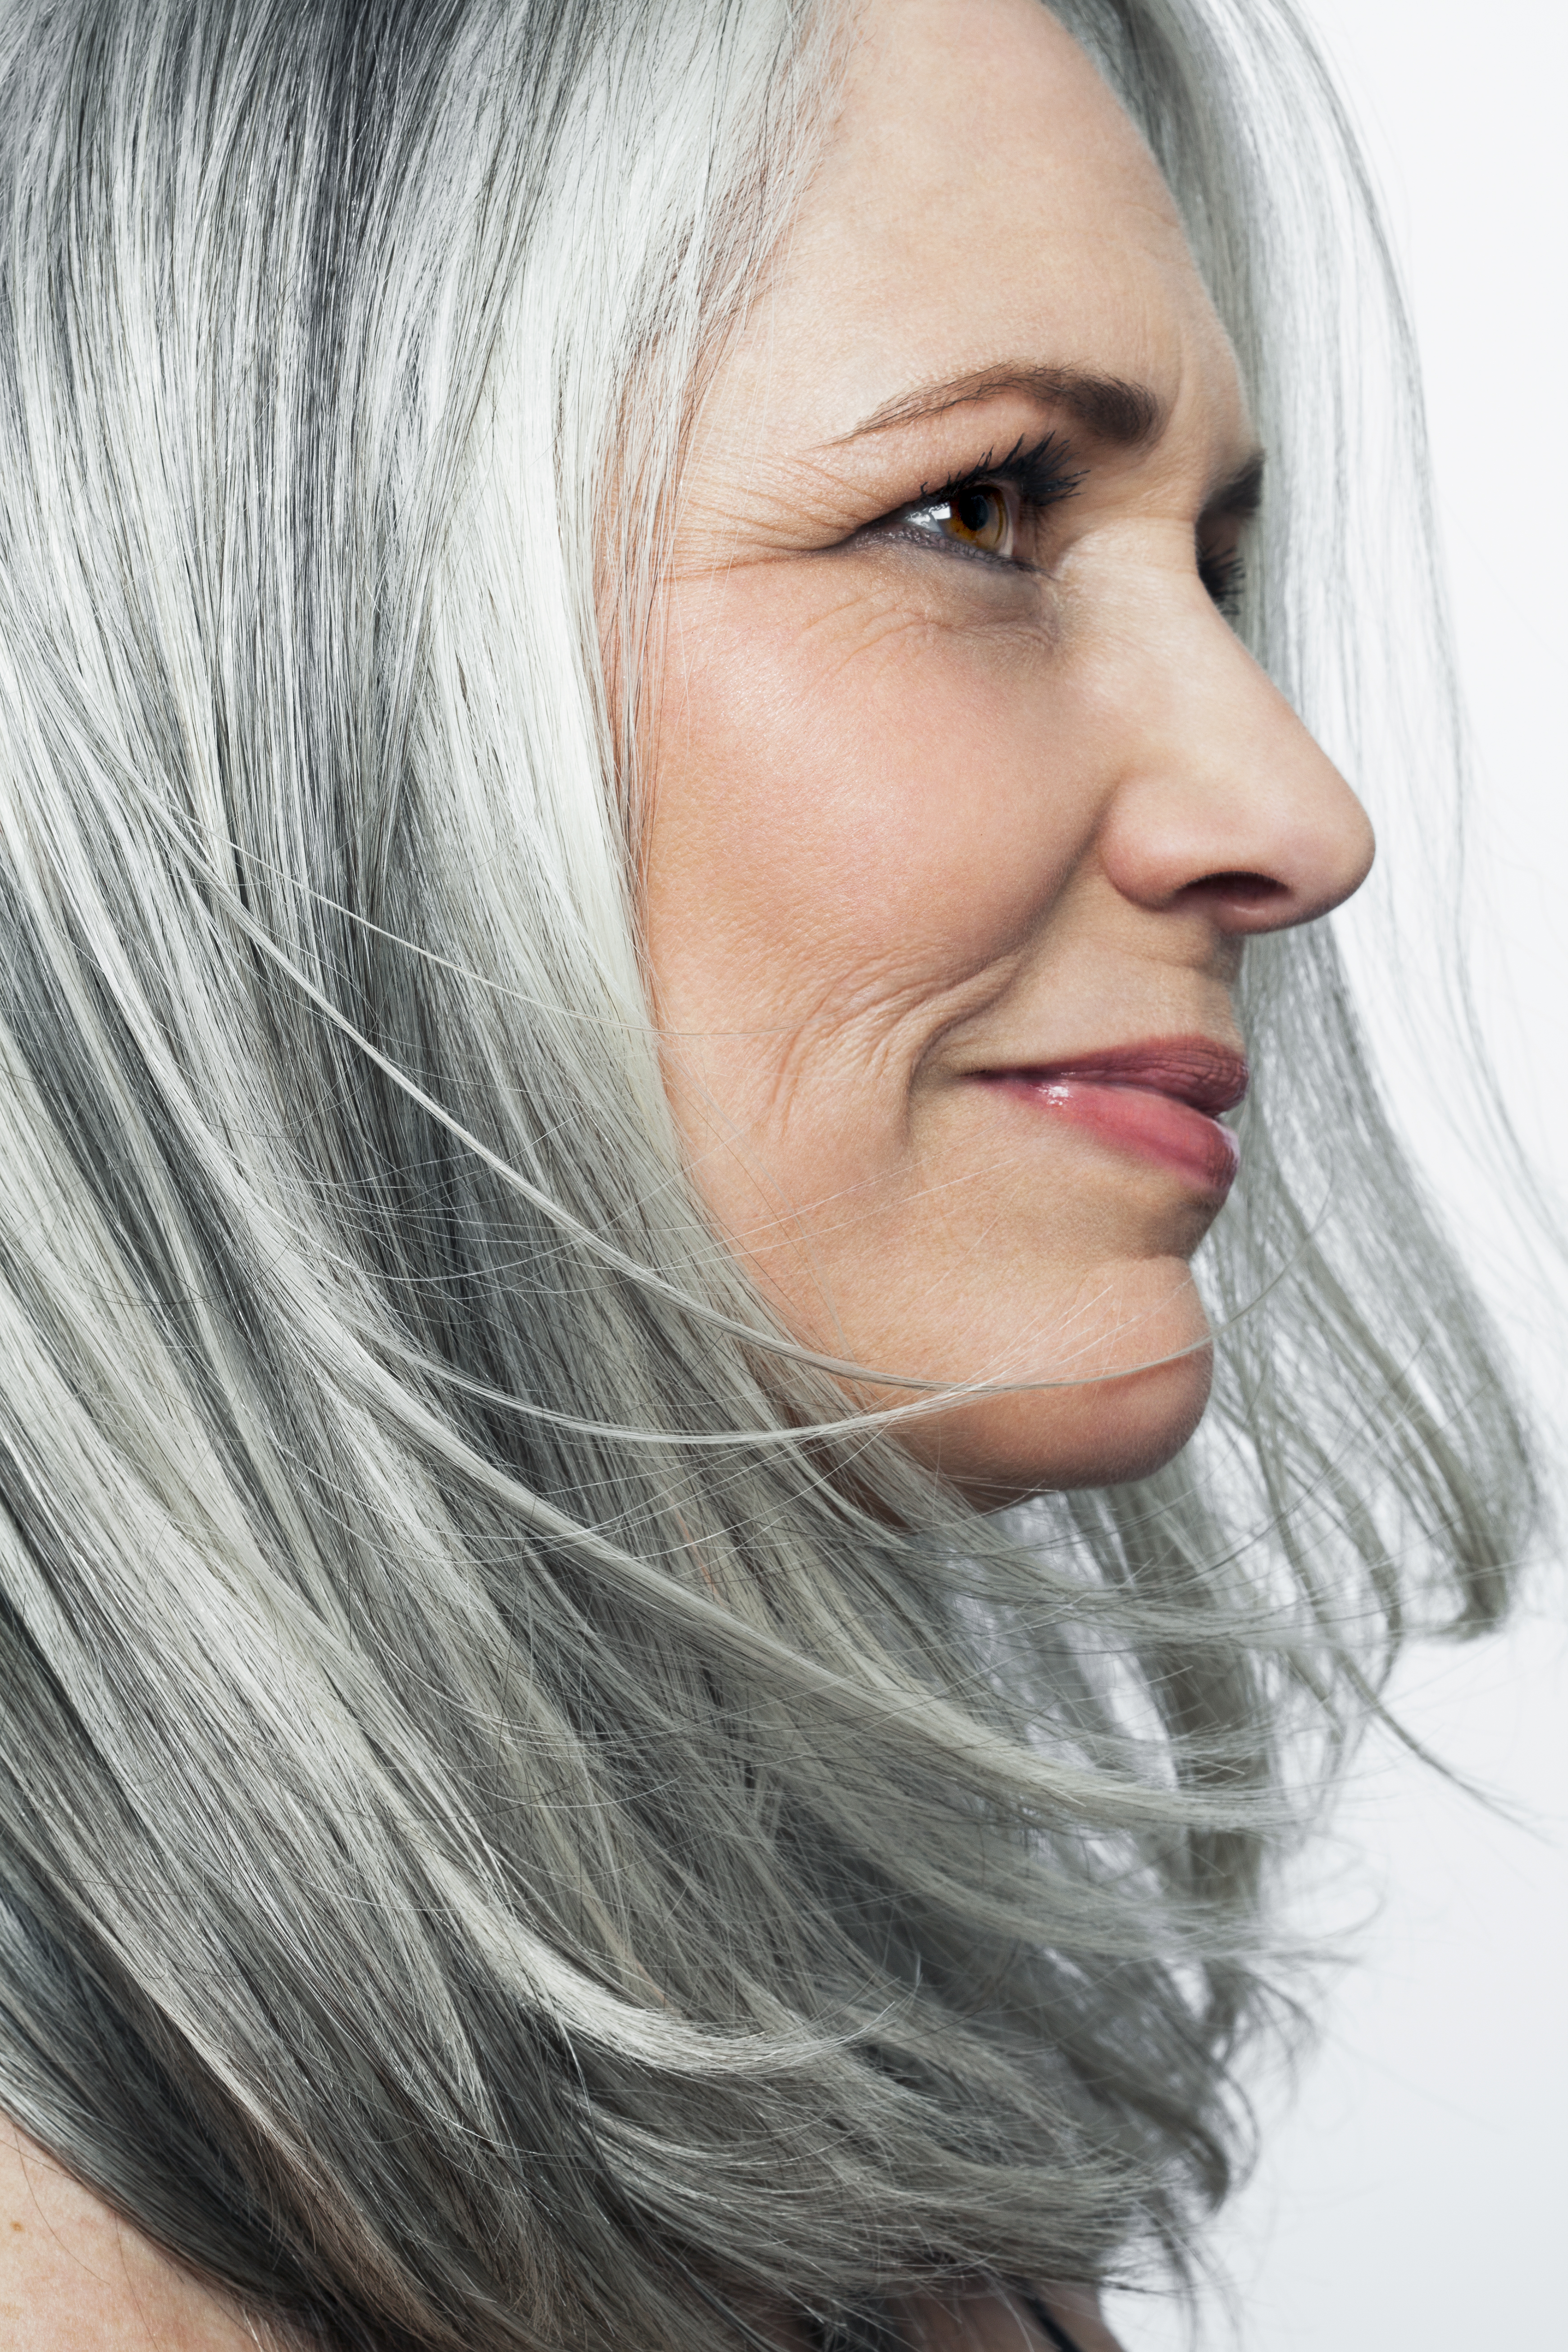 Woman with grey hair in a C-cut. | Source: Getty Images